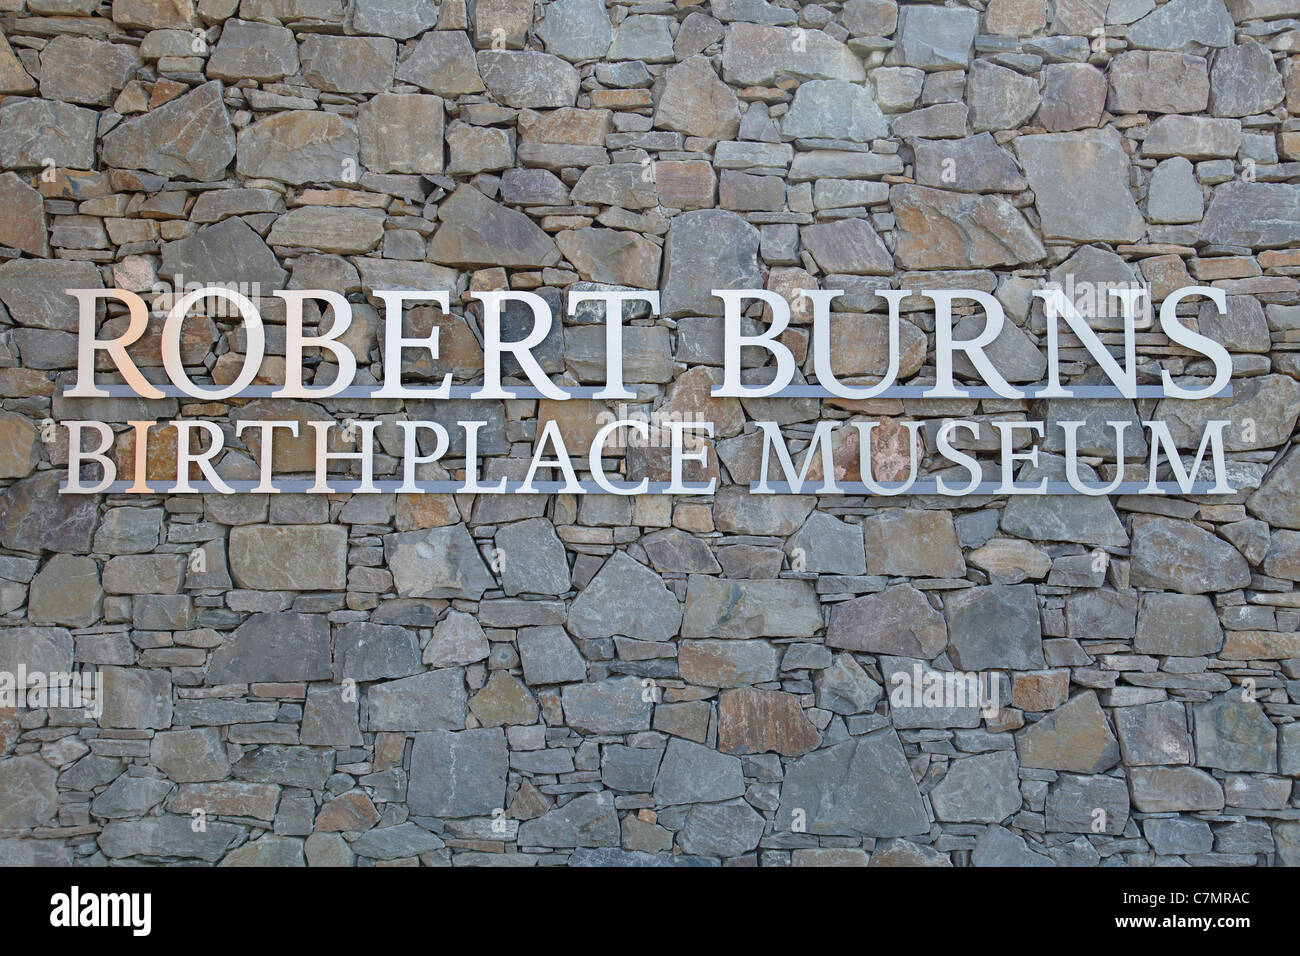 A sign at the Robert Burns Birthplace Museum run by the National Trust for Scotland in Alloway, Ayrshire, Scotland, UK Stock Photo